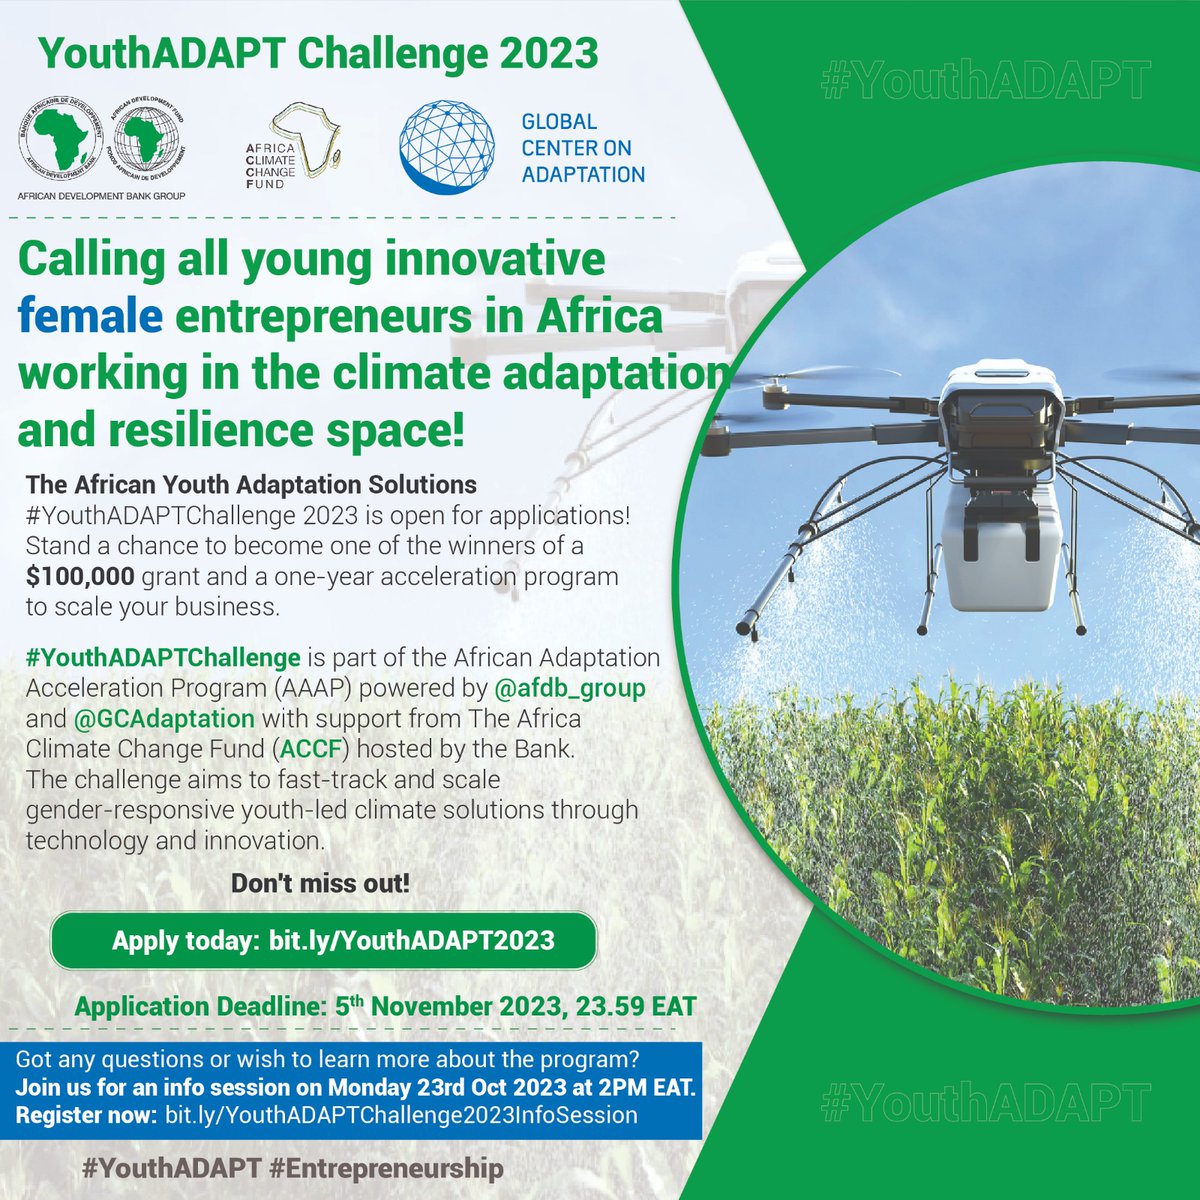 The African Youth Adaptation Solutions Challenge #YouthADAPTChallenge 2023 is now accepting applications. Register for an info session on 23/10/23 at 2PM EAT to learn more: lnkd.in/djeAxyEd. 
To know more and apply, visit bit.ly/YouthADAPT2023.
@AfDB_Group @GCAdaptation